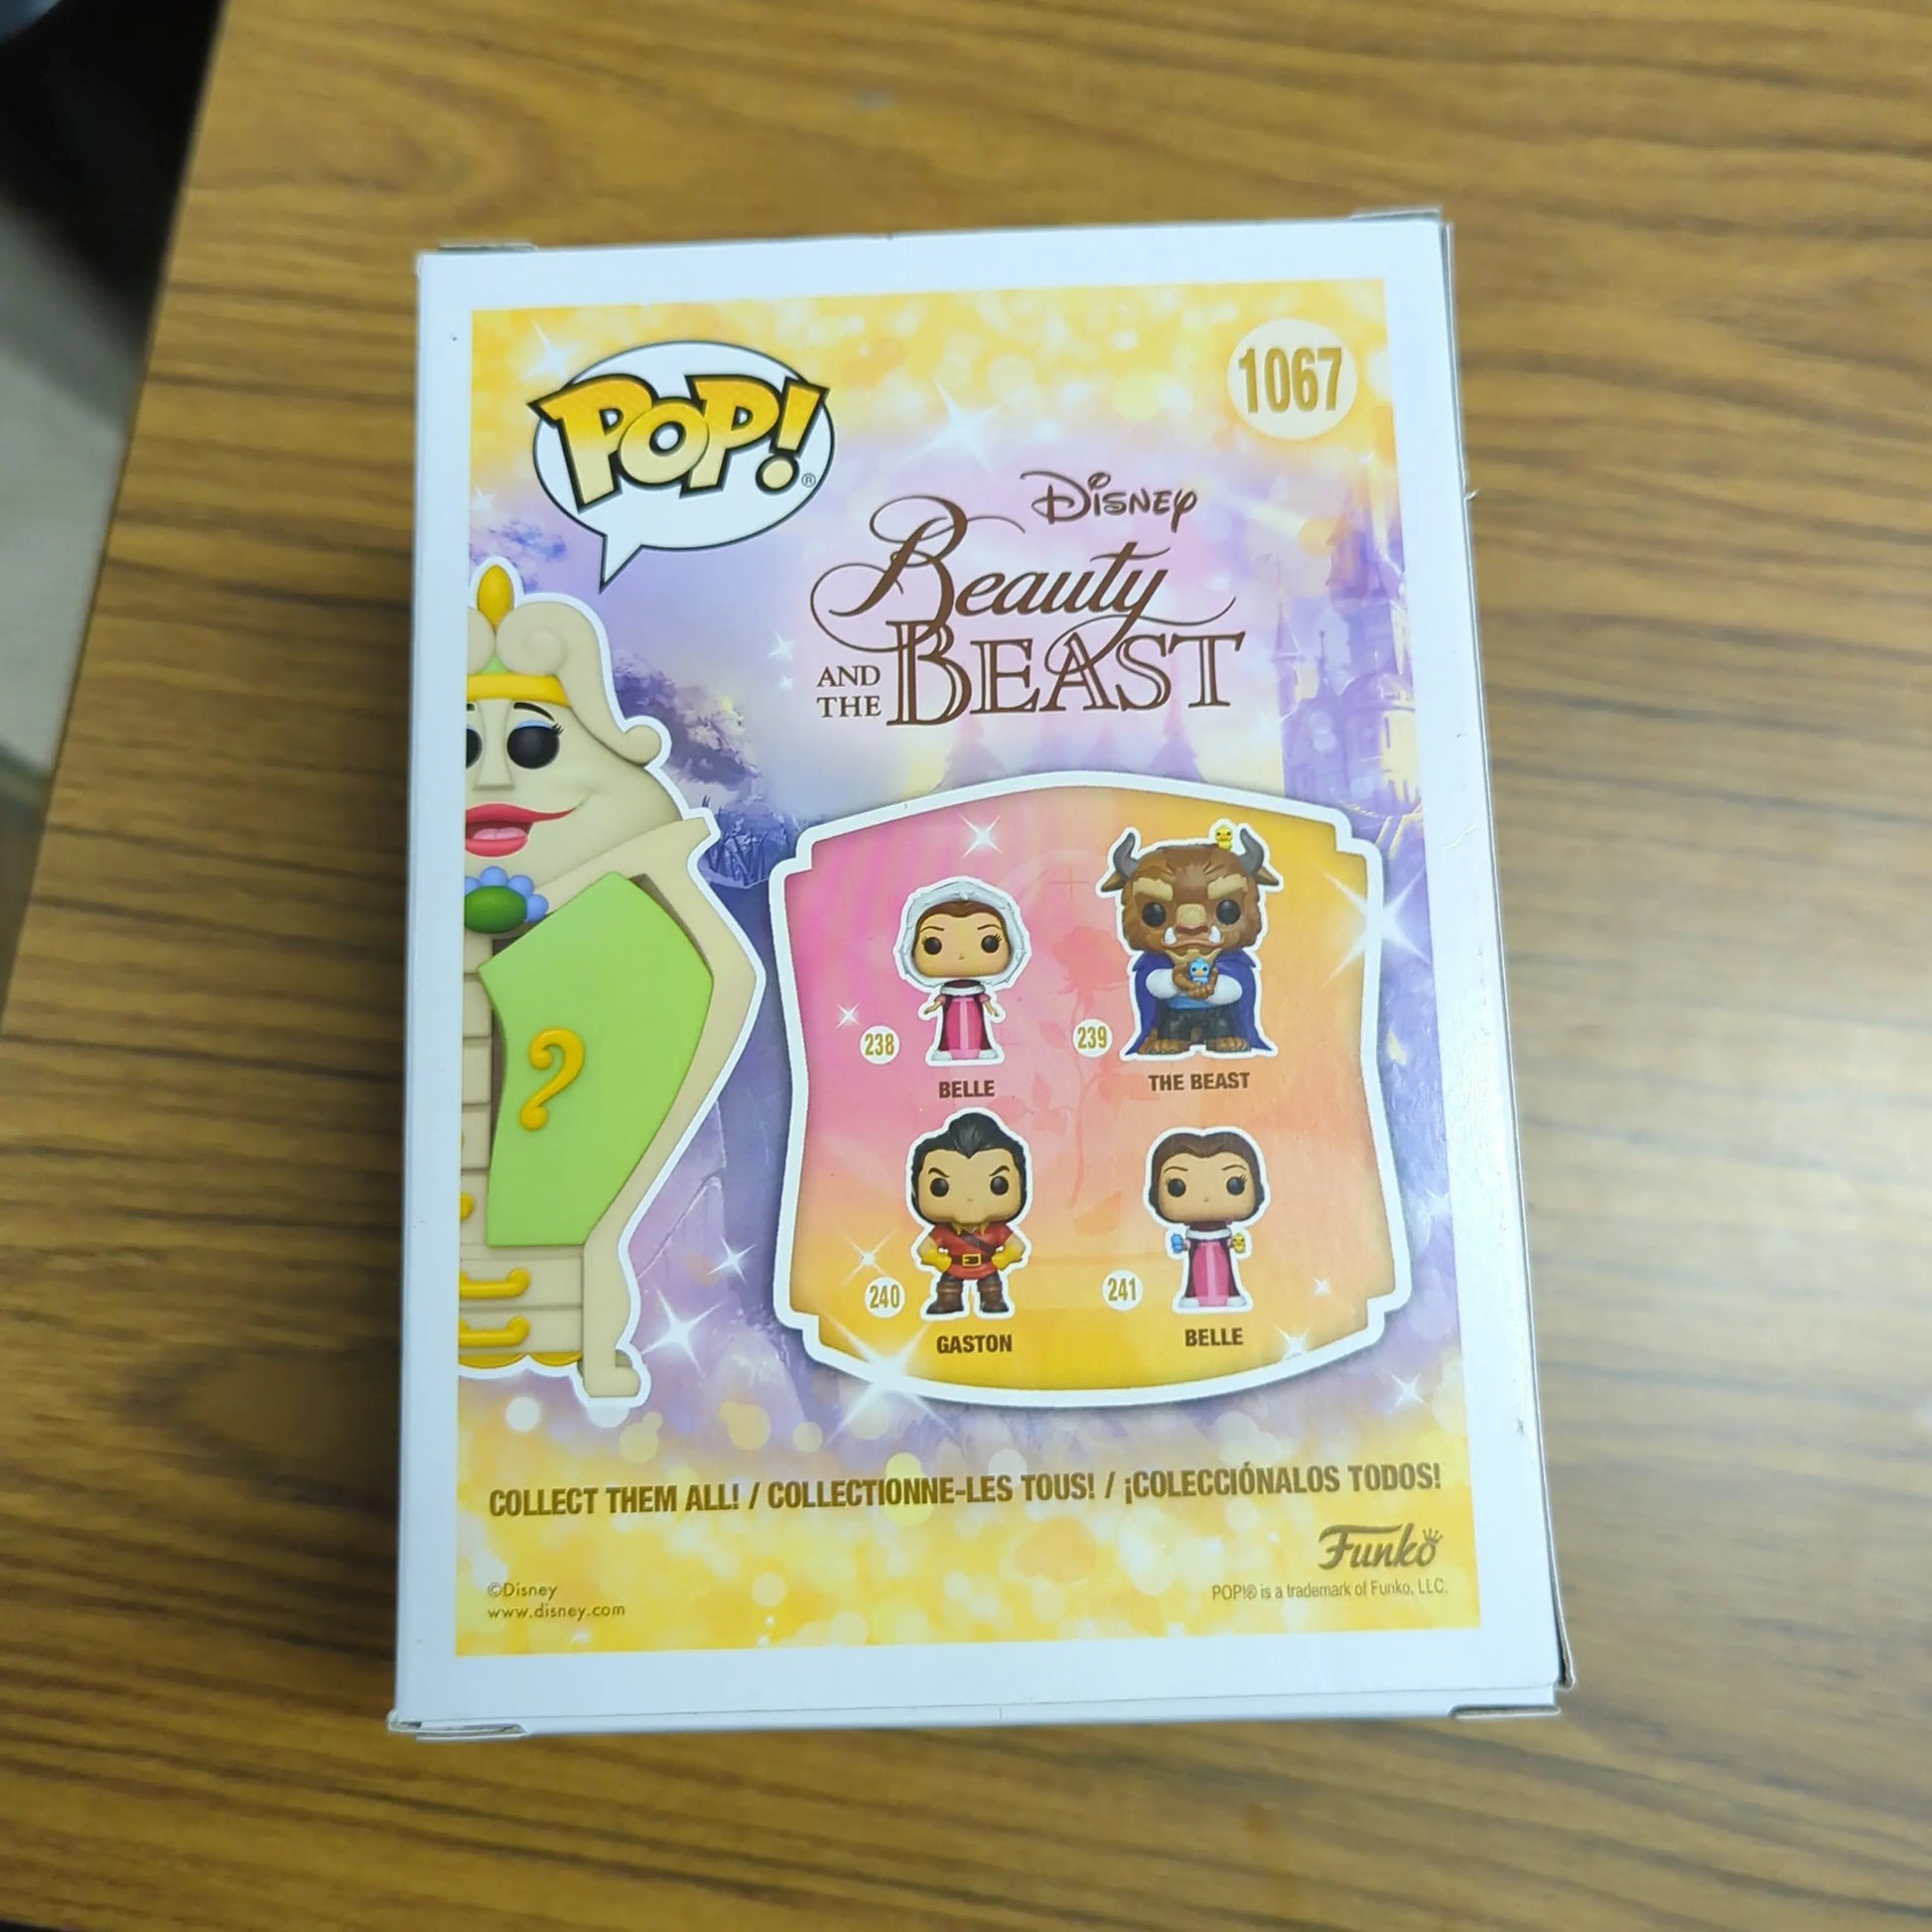 Beauty and the Beast - Wardrobe SDCC 2021 US Exclusive #1067 Pop! Vinyl FRENLY BRICKS - Open 7 Days